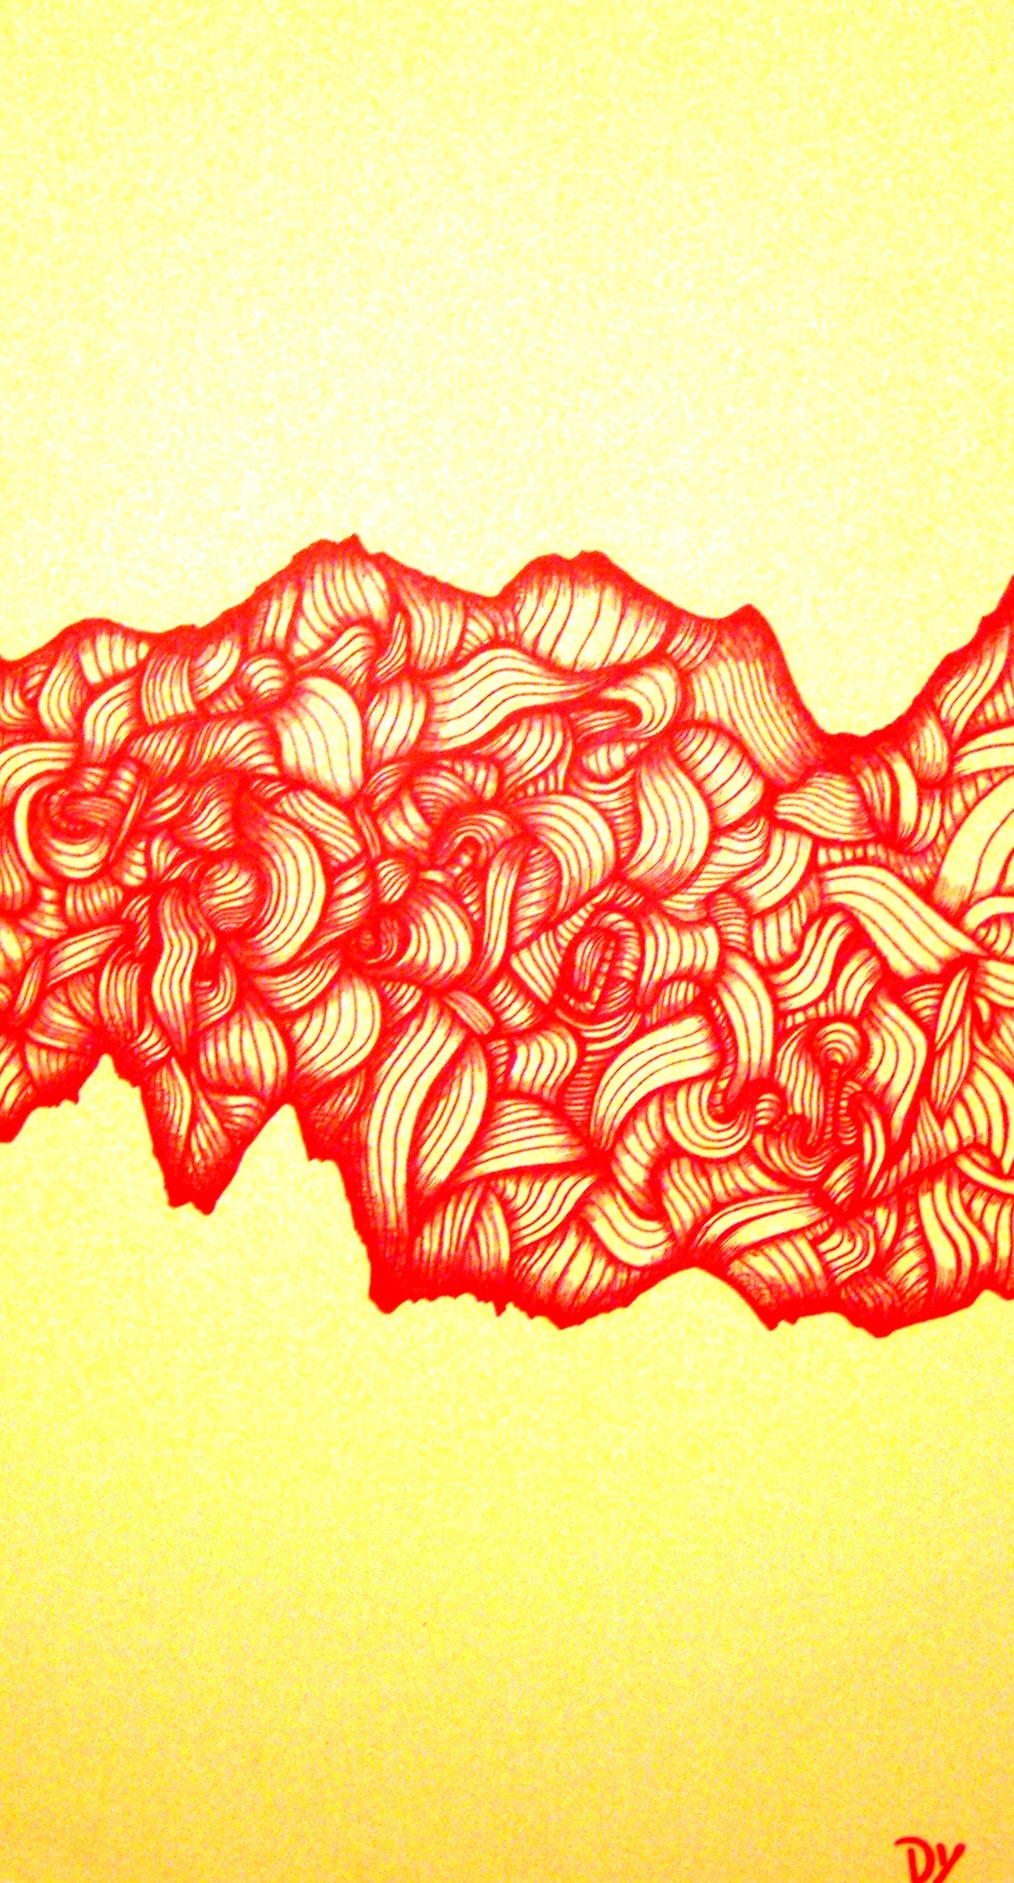 peaks
pen and ink, 2012
by Dave Yasenchak